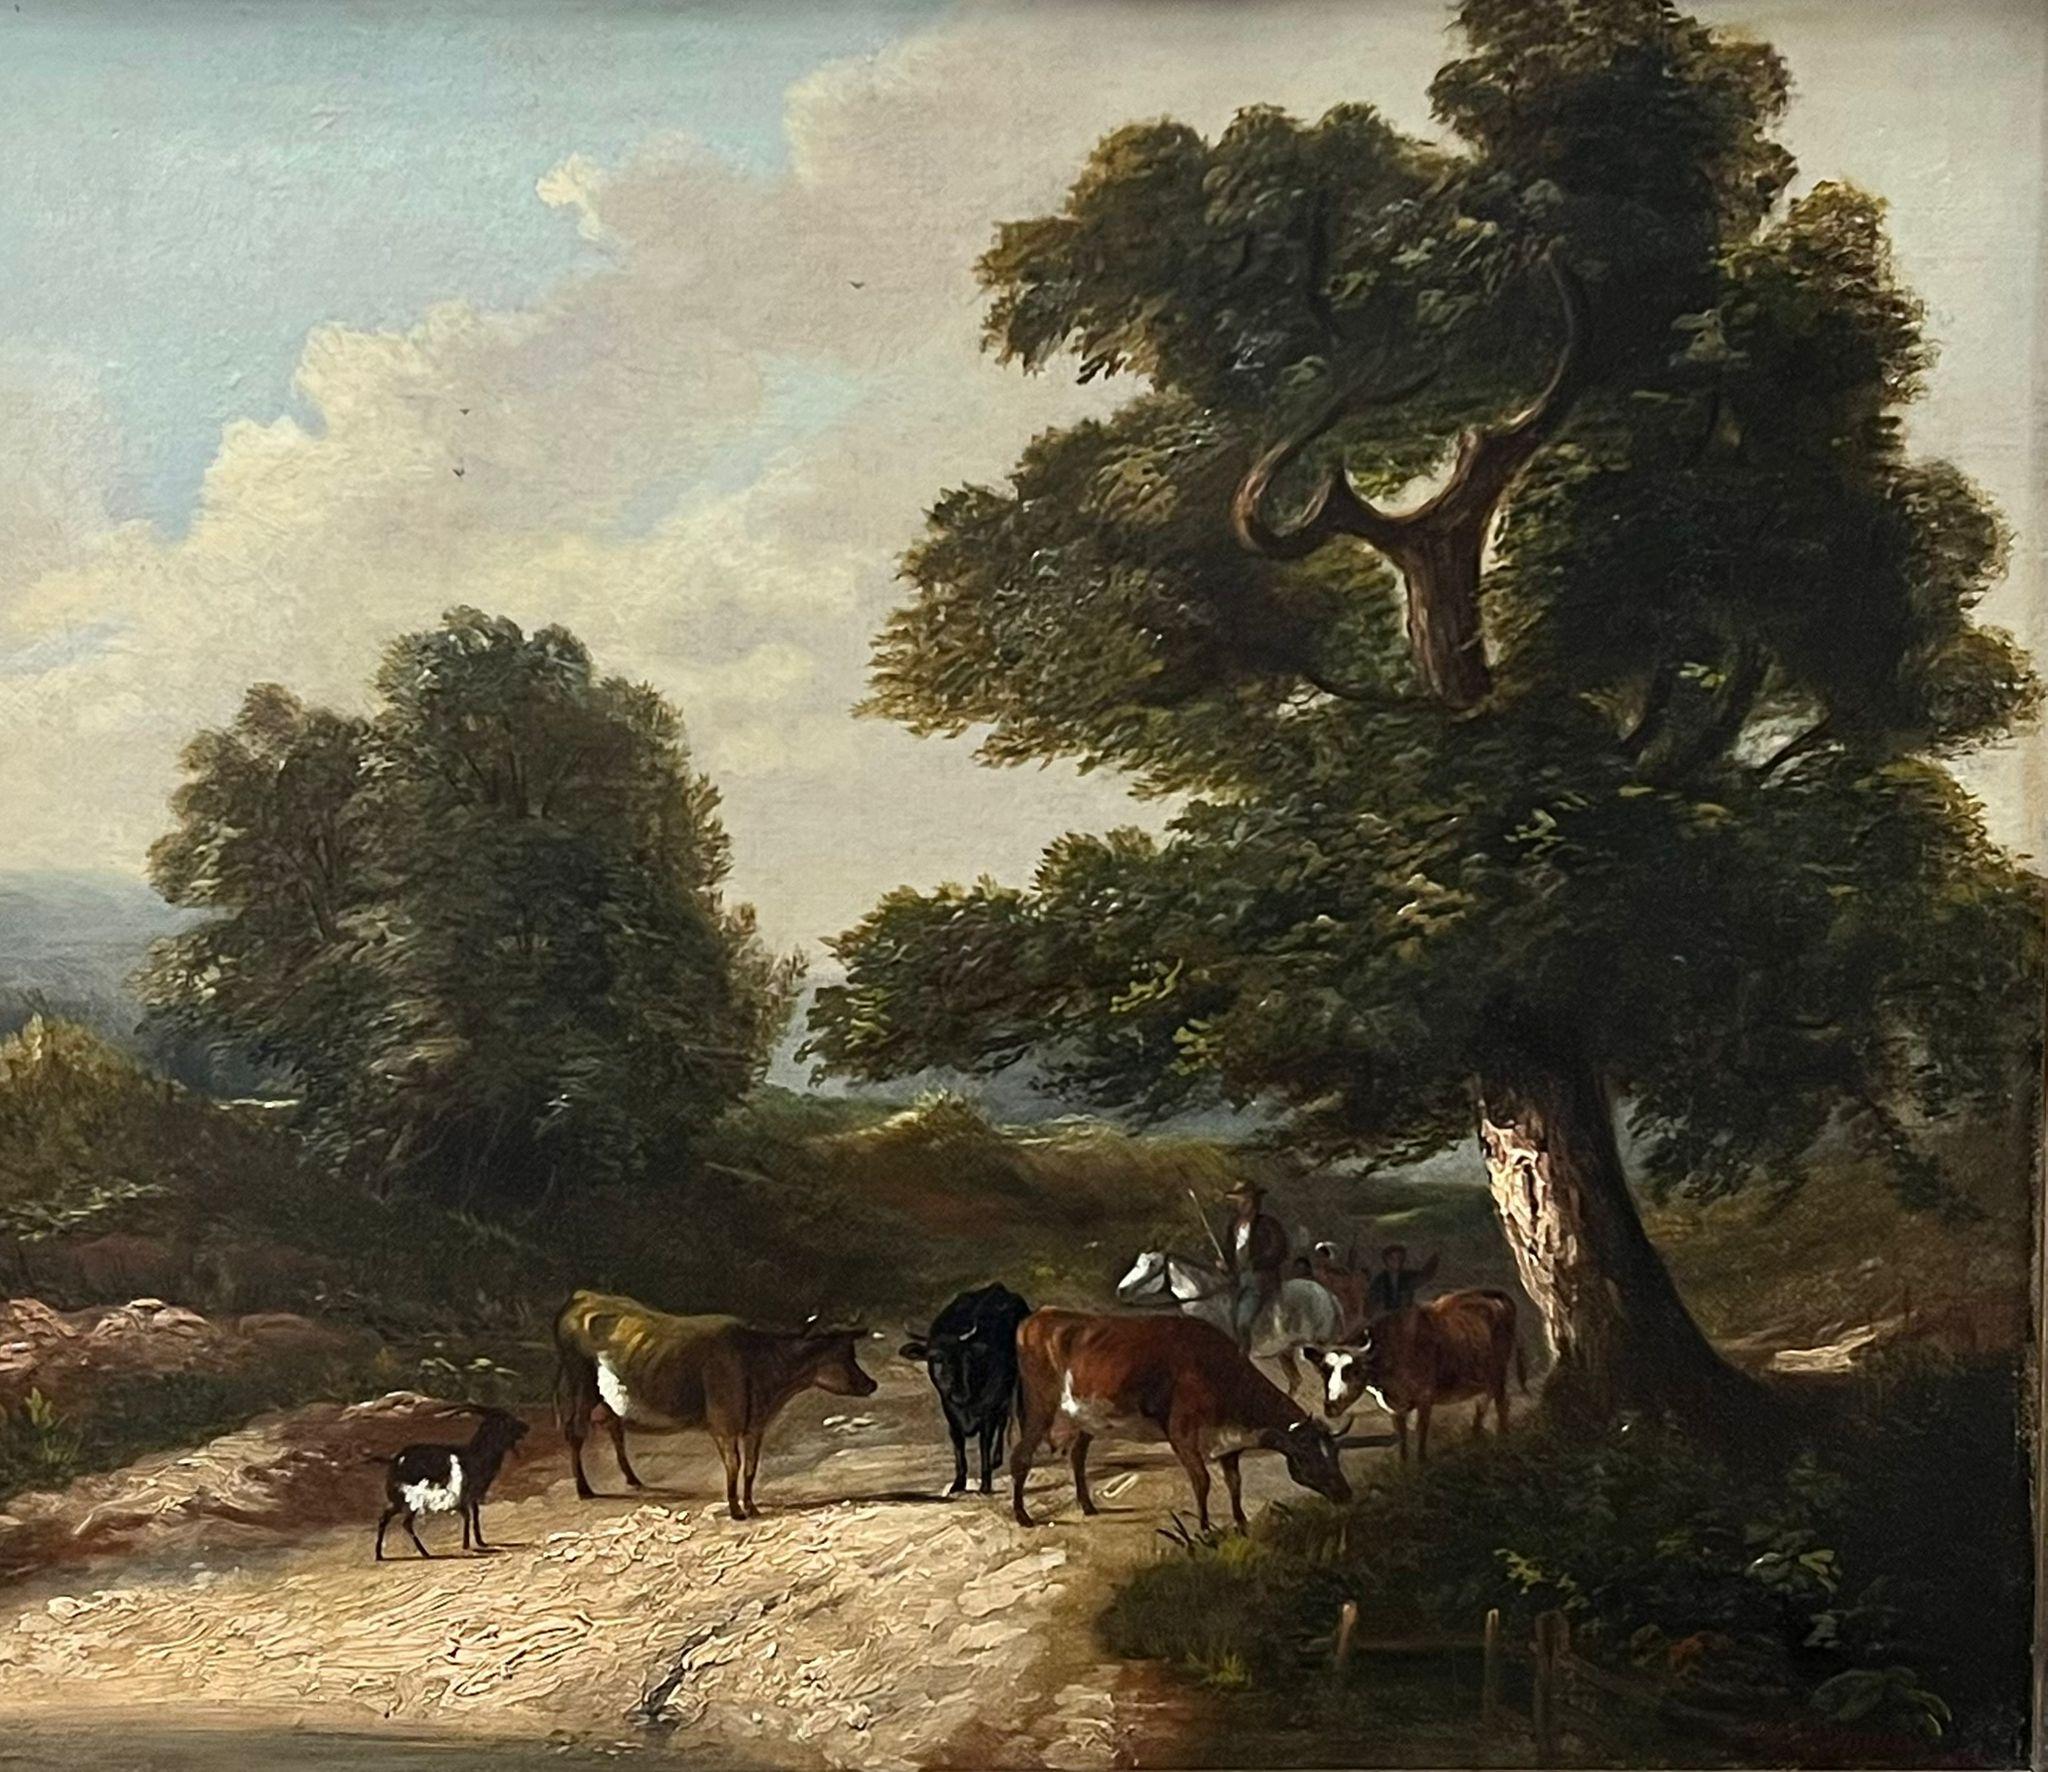 Victorian English Landscape Painting - Charming Victorian Signed Oil, Farmer Leading Cattle Rural Lane on Market Day